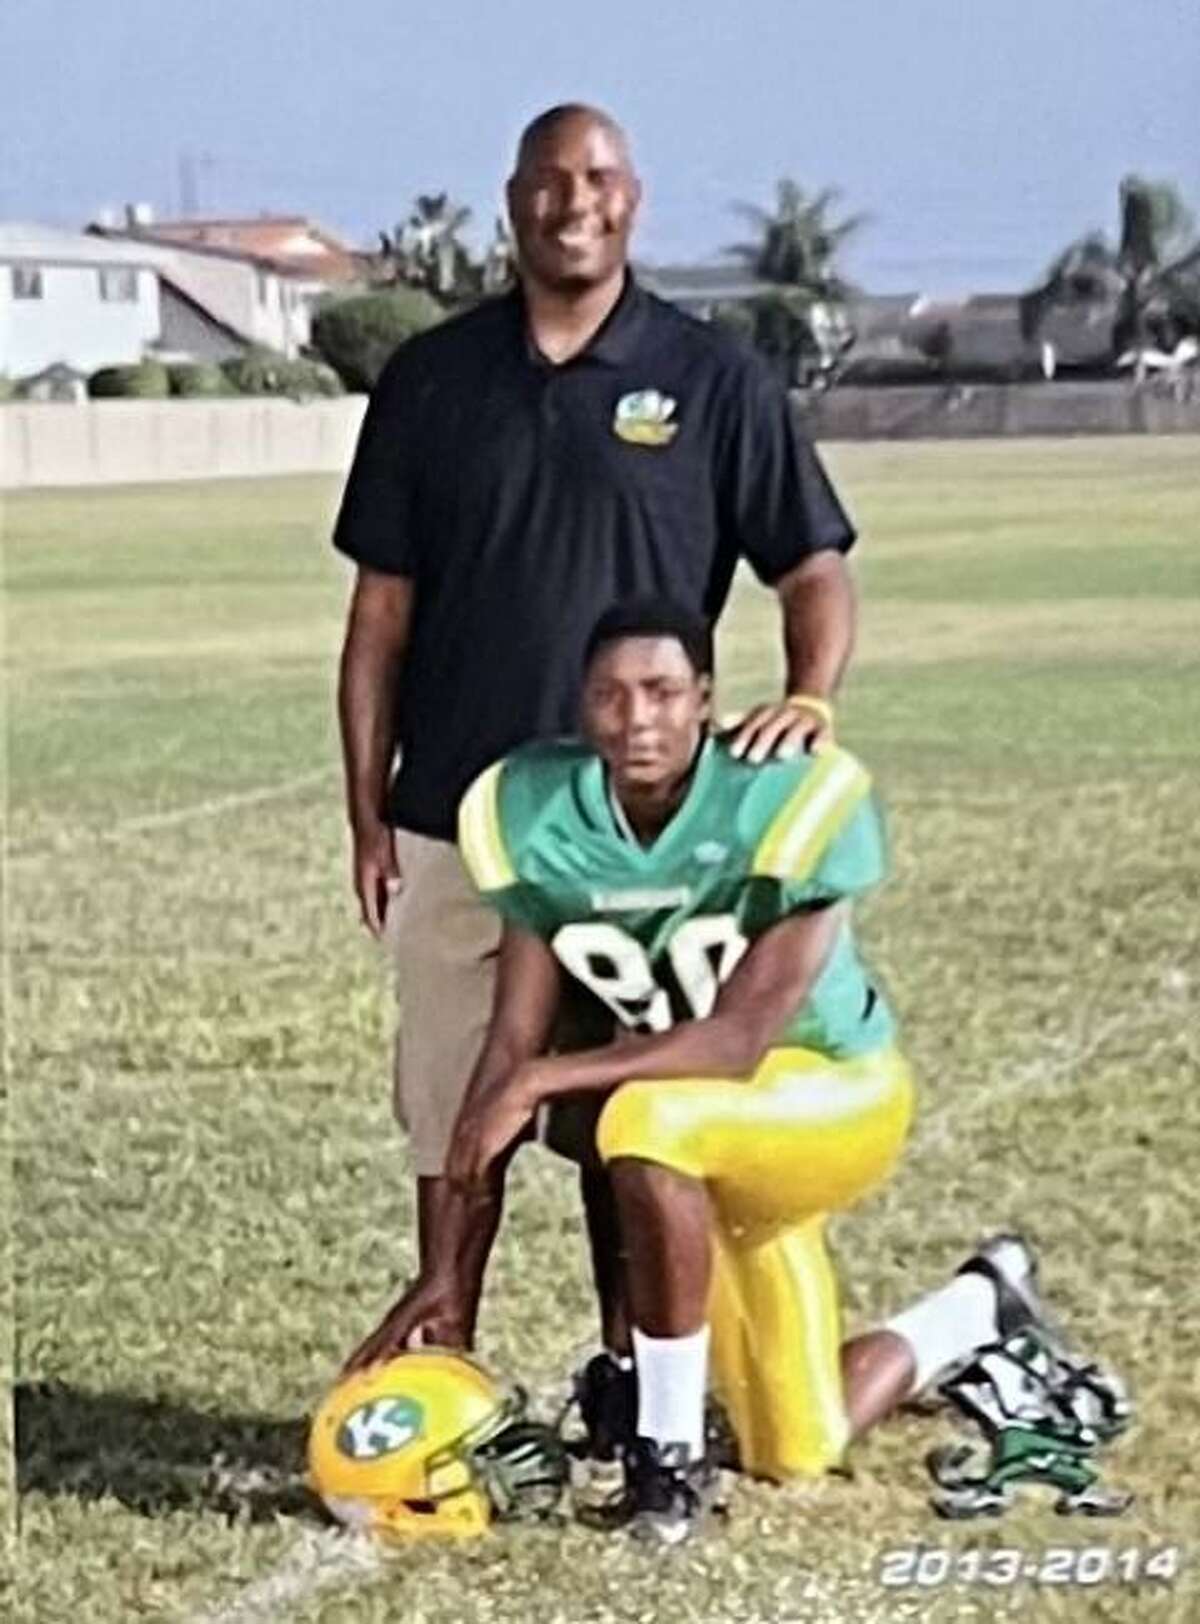 San Jose State tight end Derrick Deese Jr. and his father, Derrick, a former 49ers offensive lineman, when Derrick Jr. was at Kennedy High in La Palma.